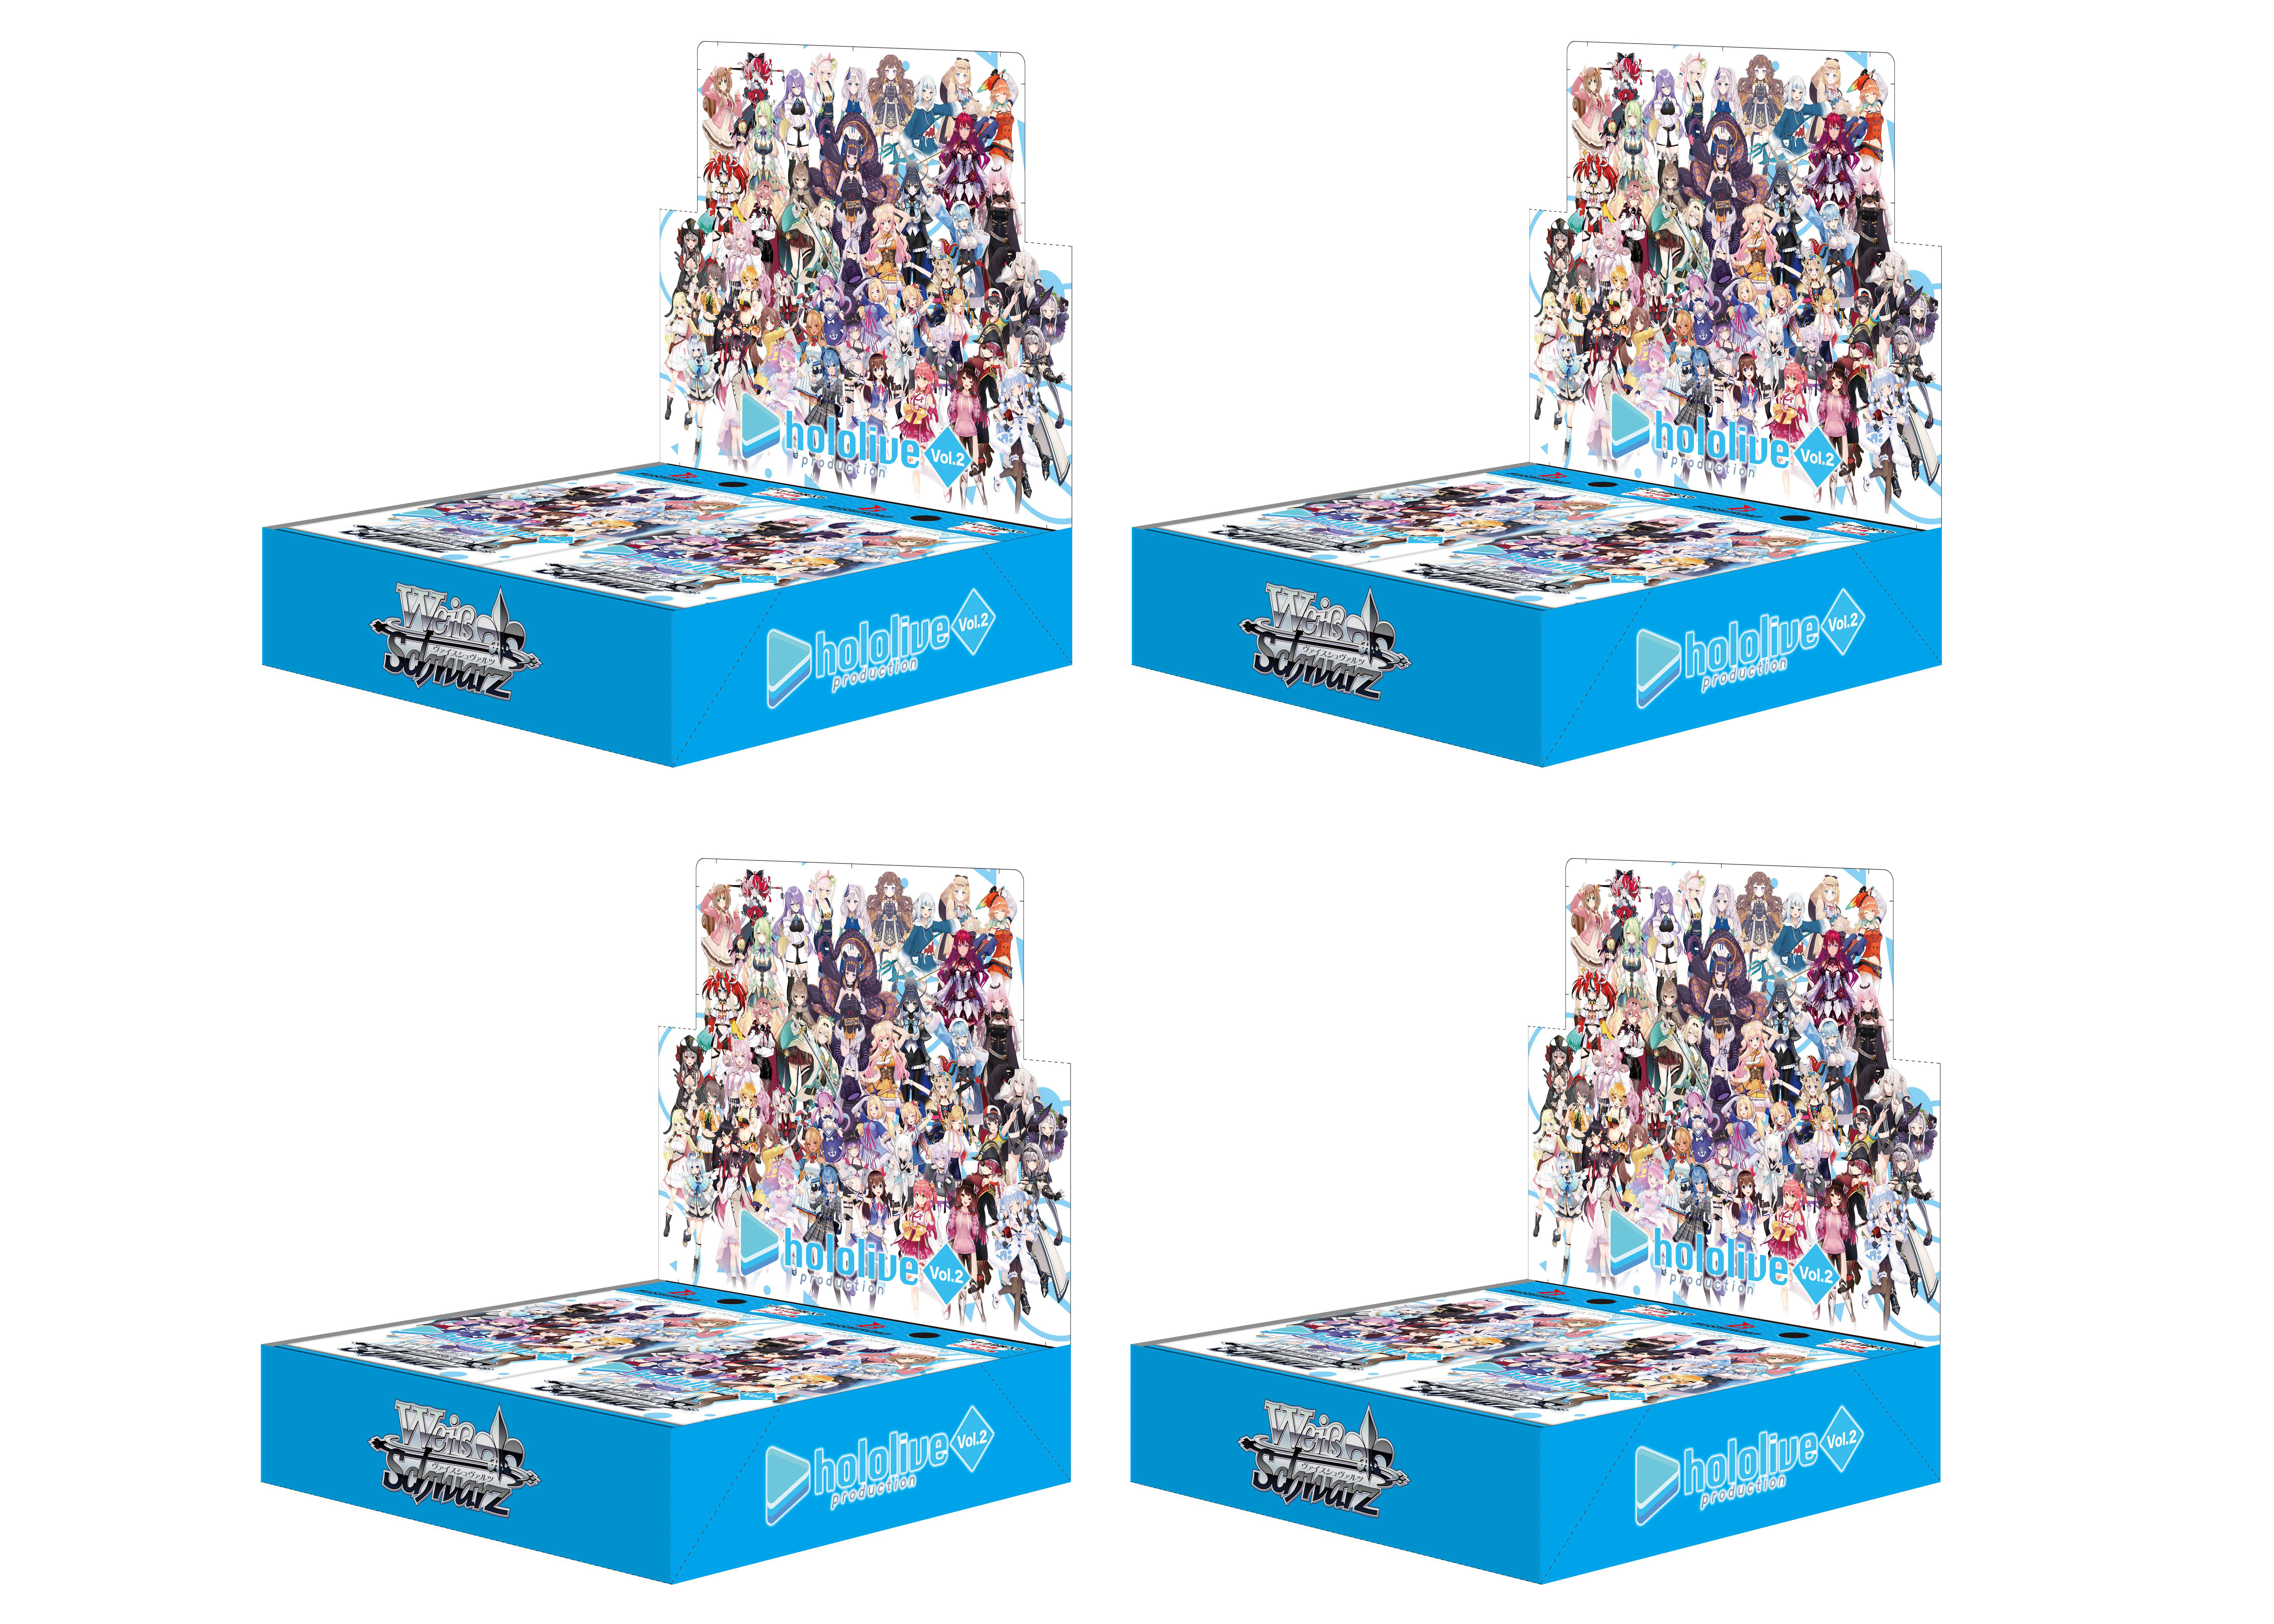 Weiss Schwarz Hololive Production Vol. 2 Booster Box (Japanese) 4x